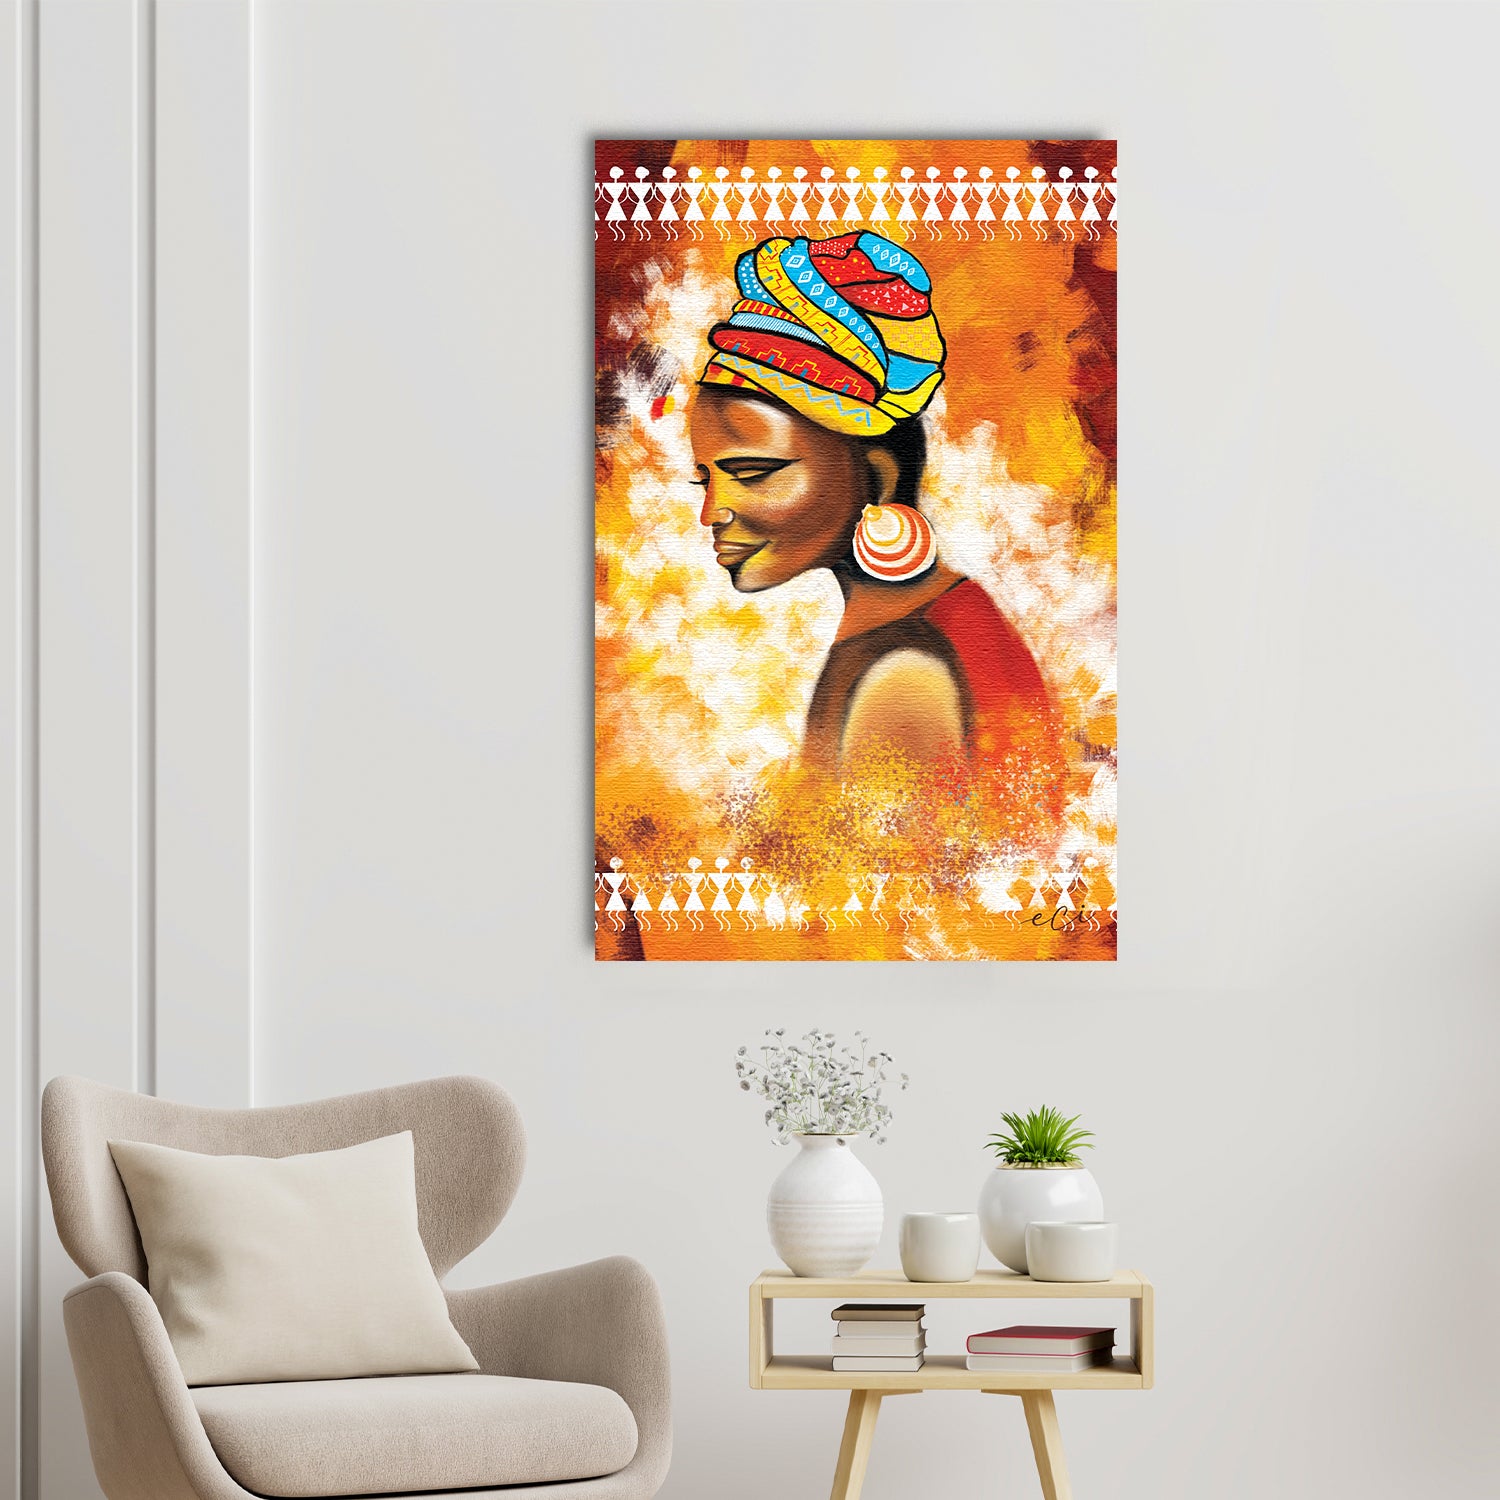 Tribal Lady Original Design Canvas Printed Wall Painting